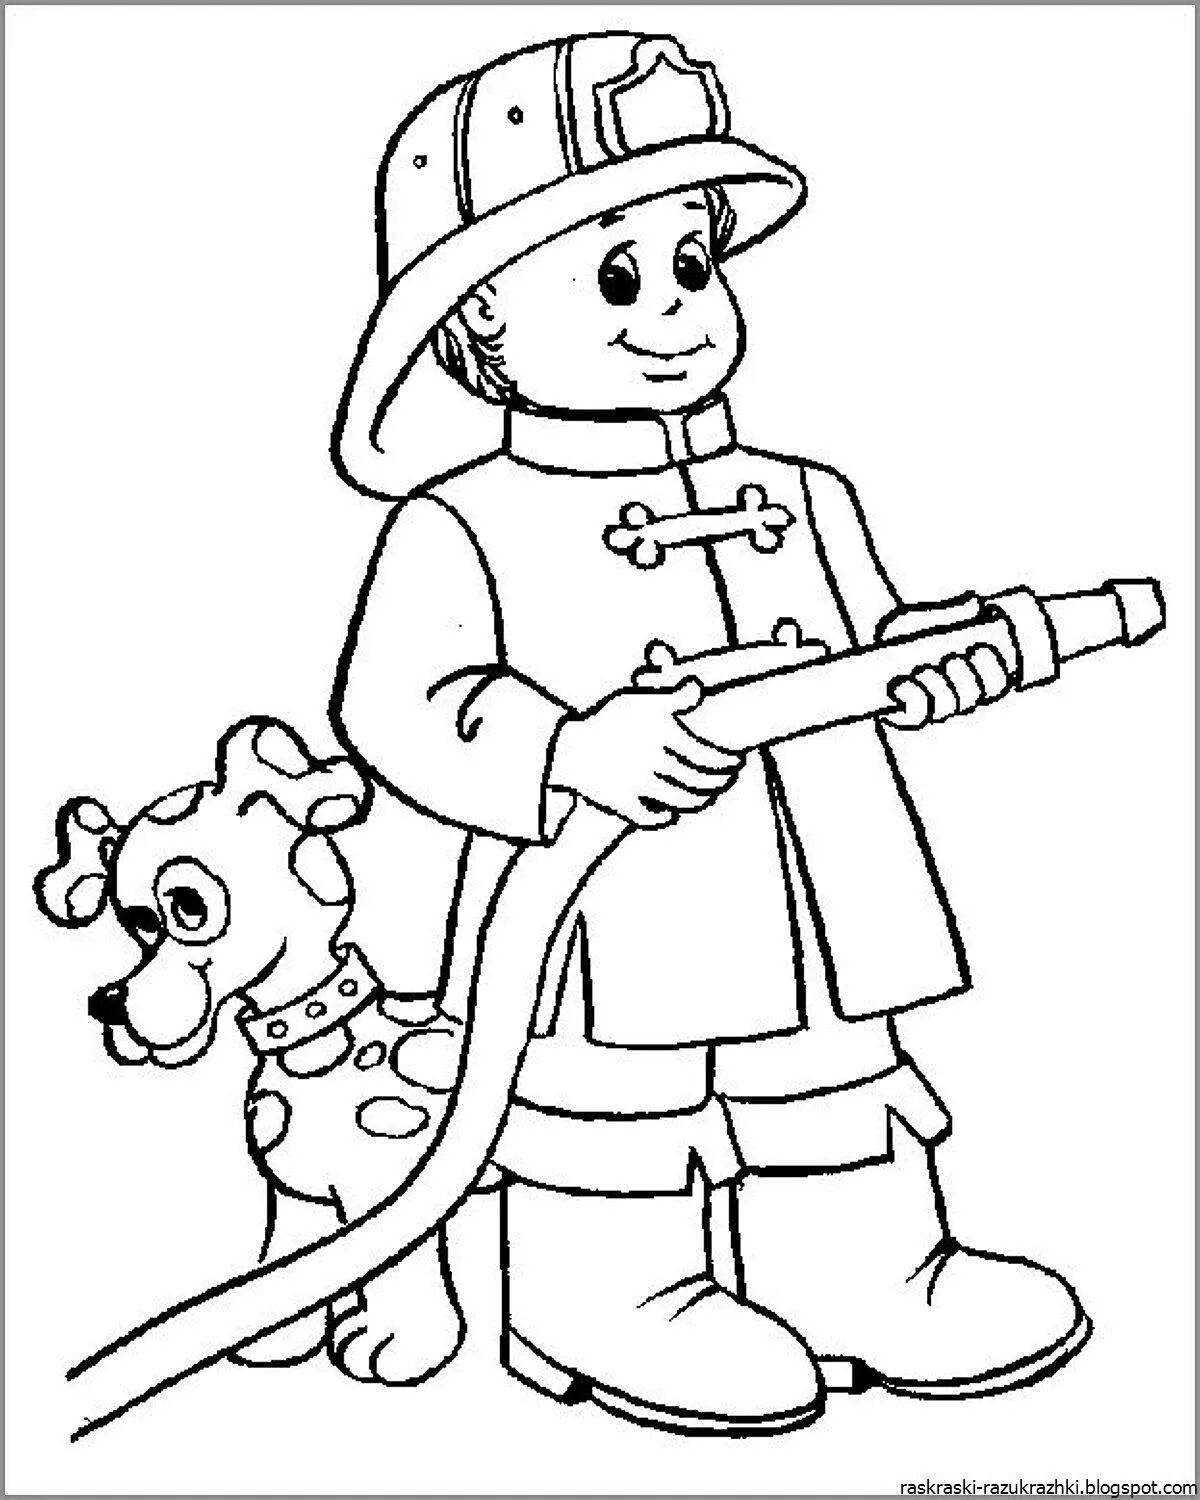 Coloring book for children professions